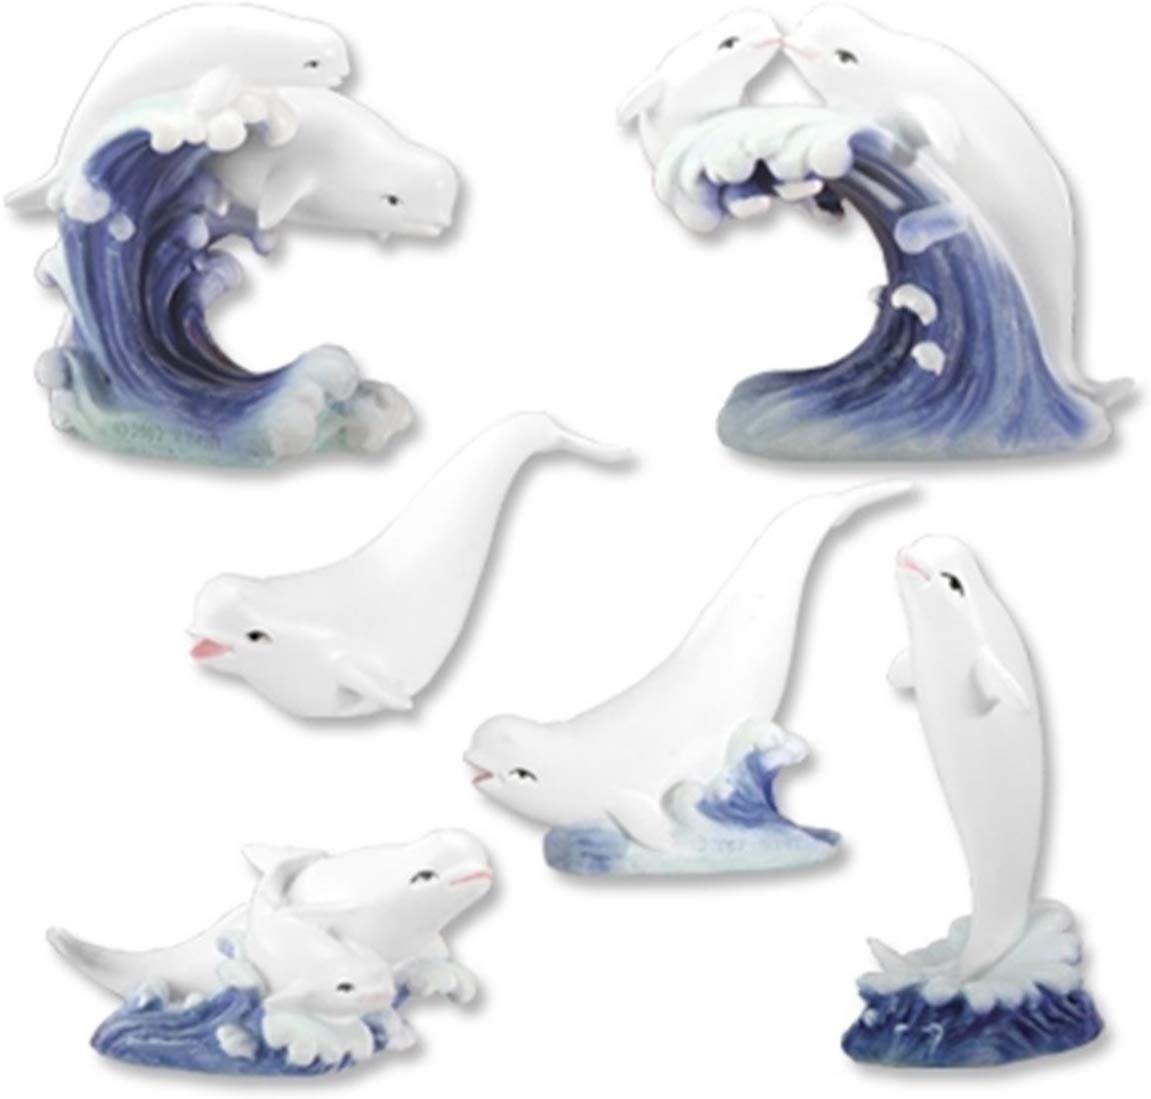 Beluga Whales Collectible, Set of 6